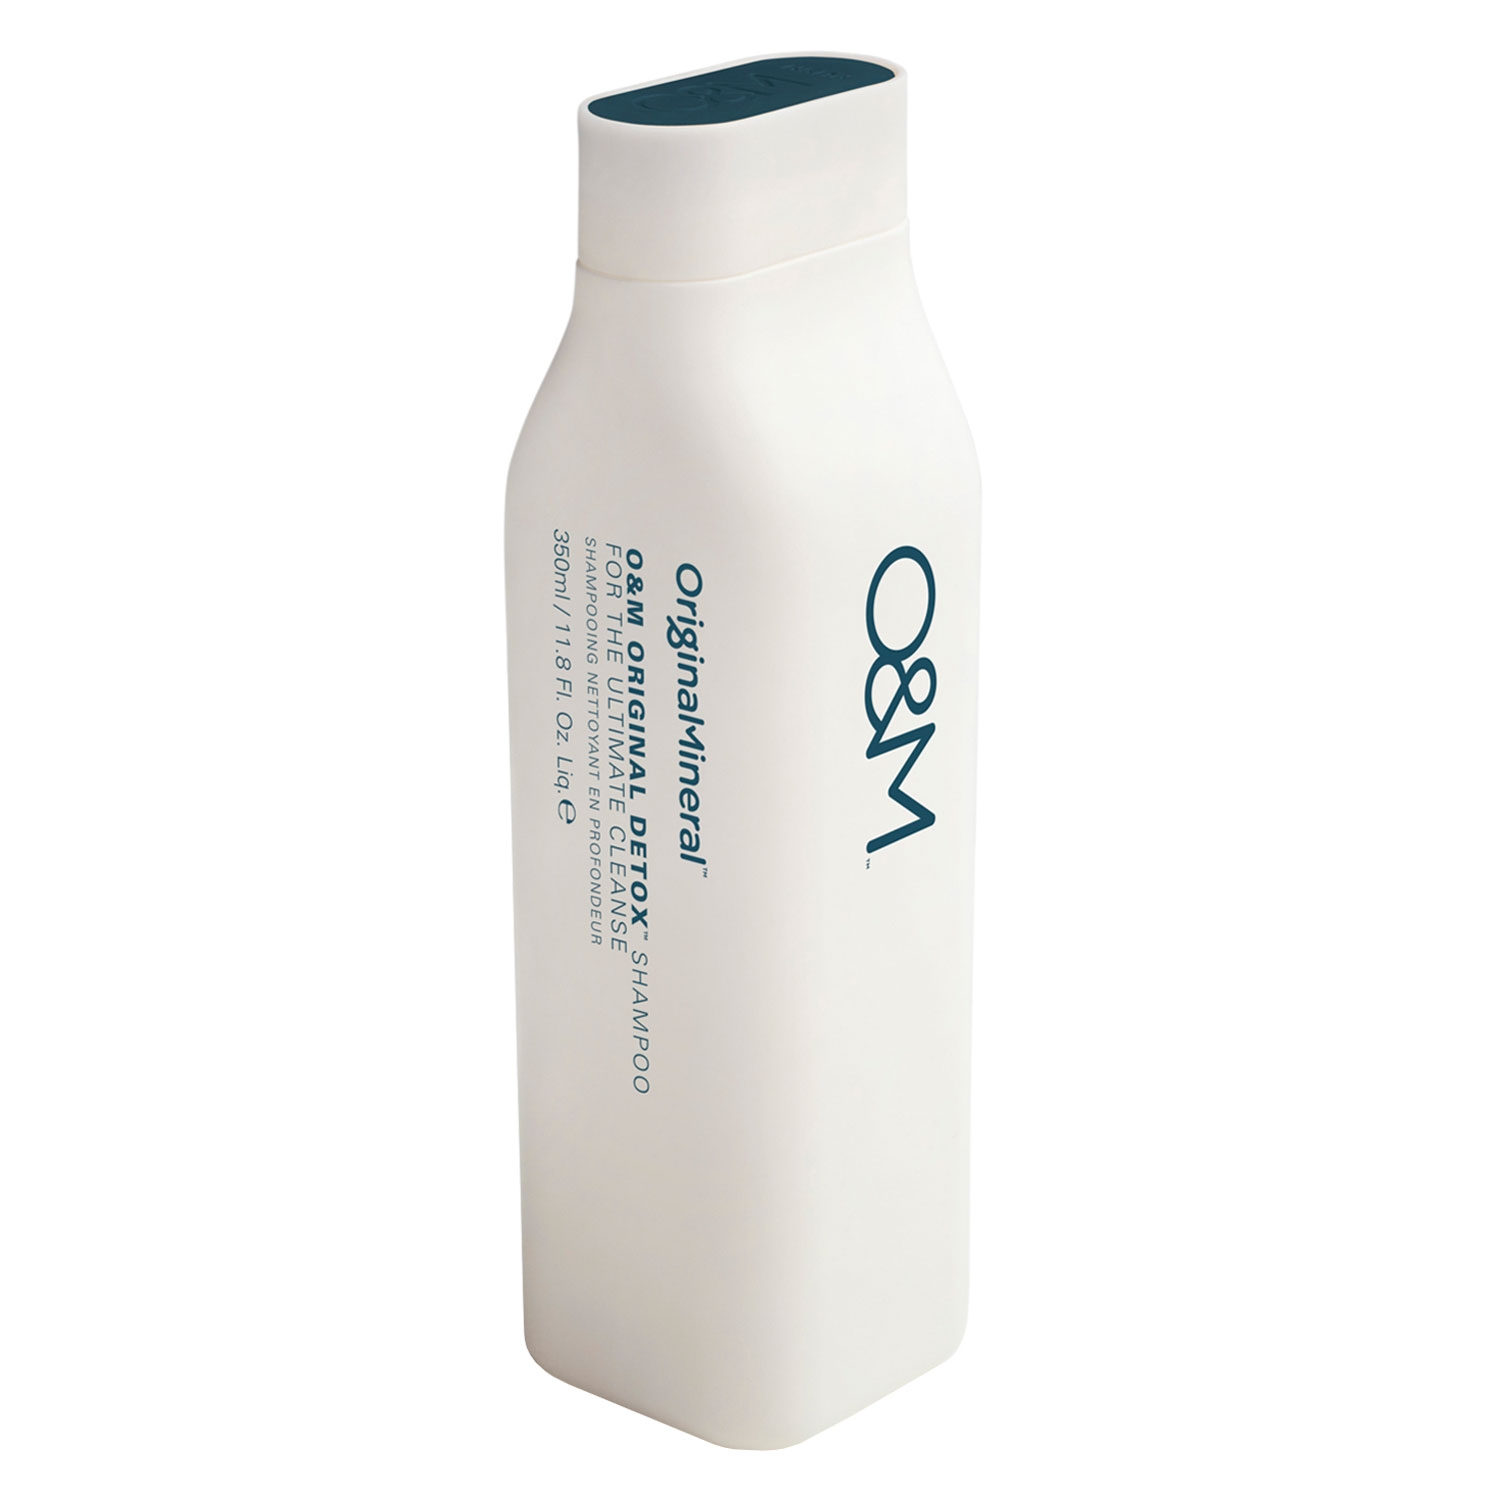 Product image from O&M Haircare - Original Detox Cleanse Shampoo